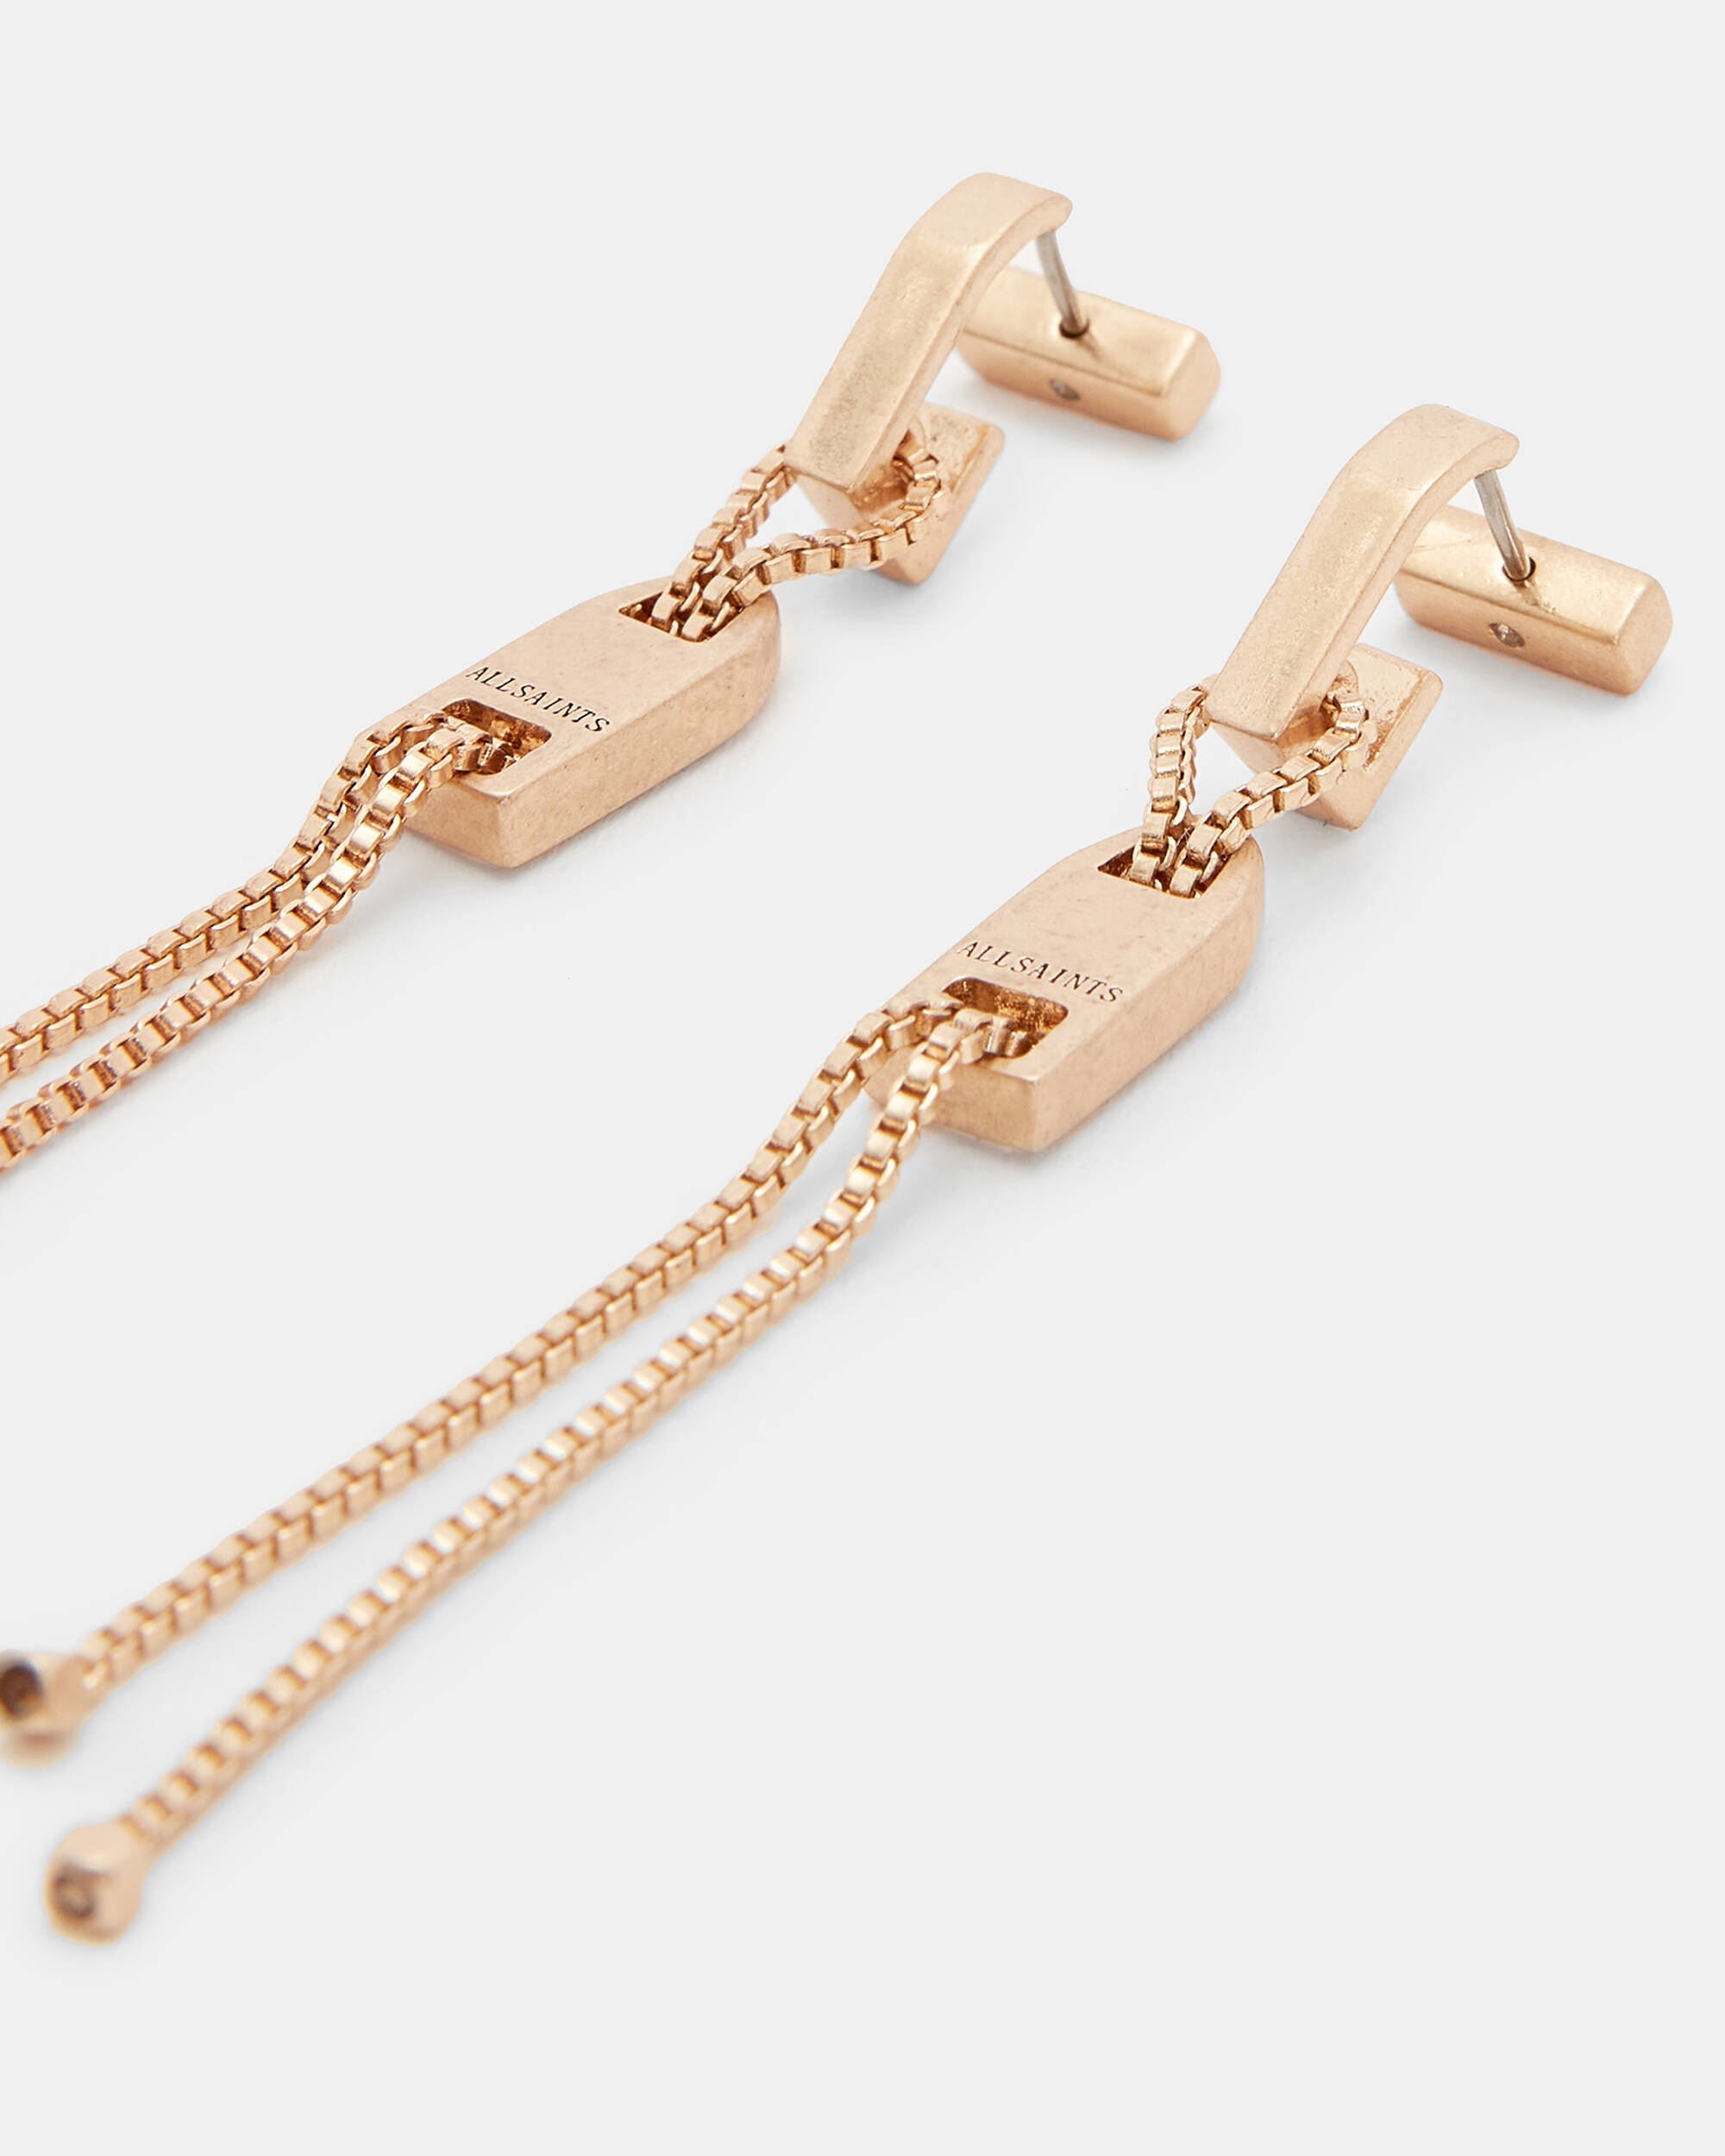 Zosia Chain Gold-Tone Earrings  large image number 3